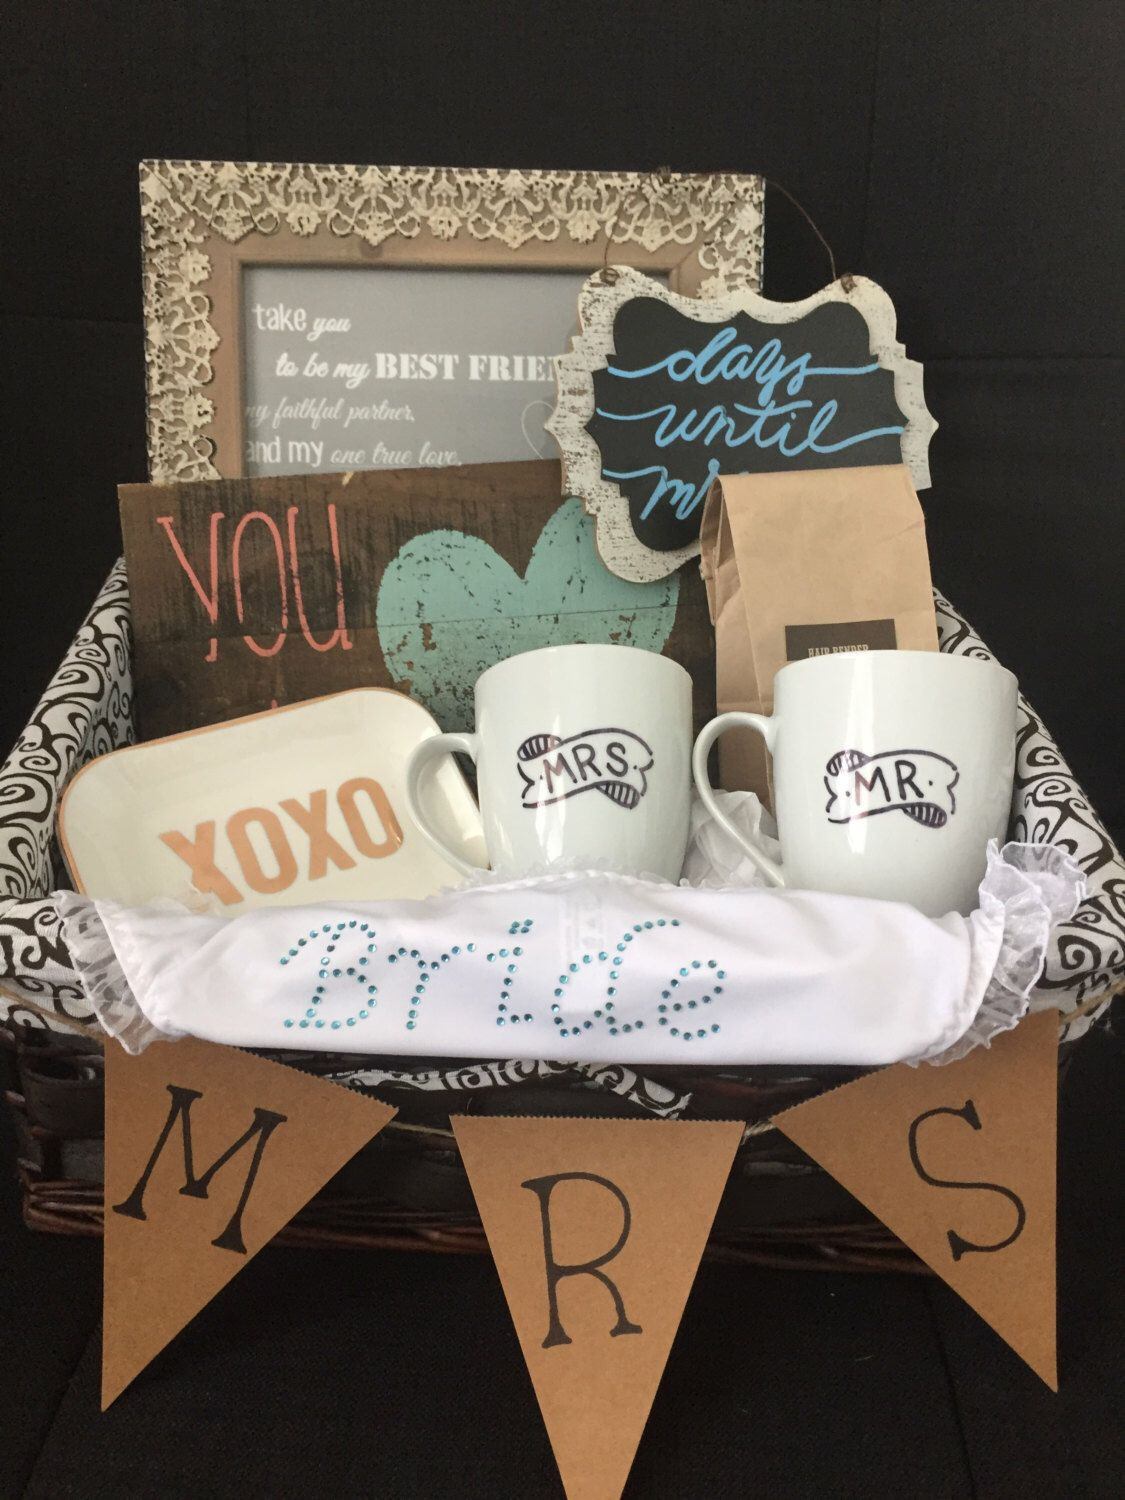 Bridal Shower Gift Basket Ideas For Bride
 Customizable "His" & "Her" coffee mugs Gifts